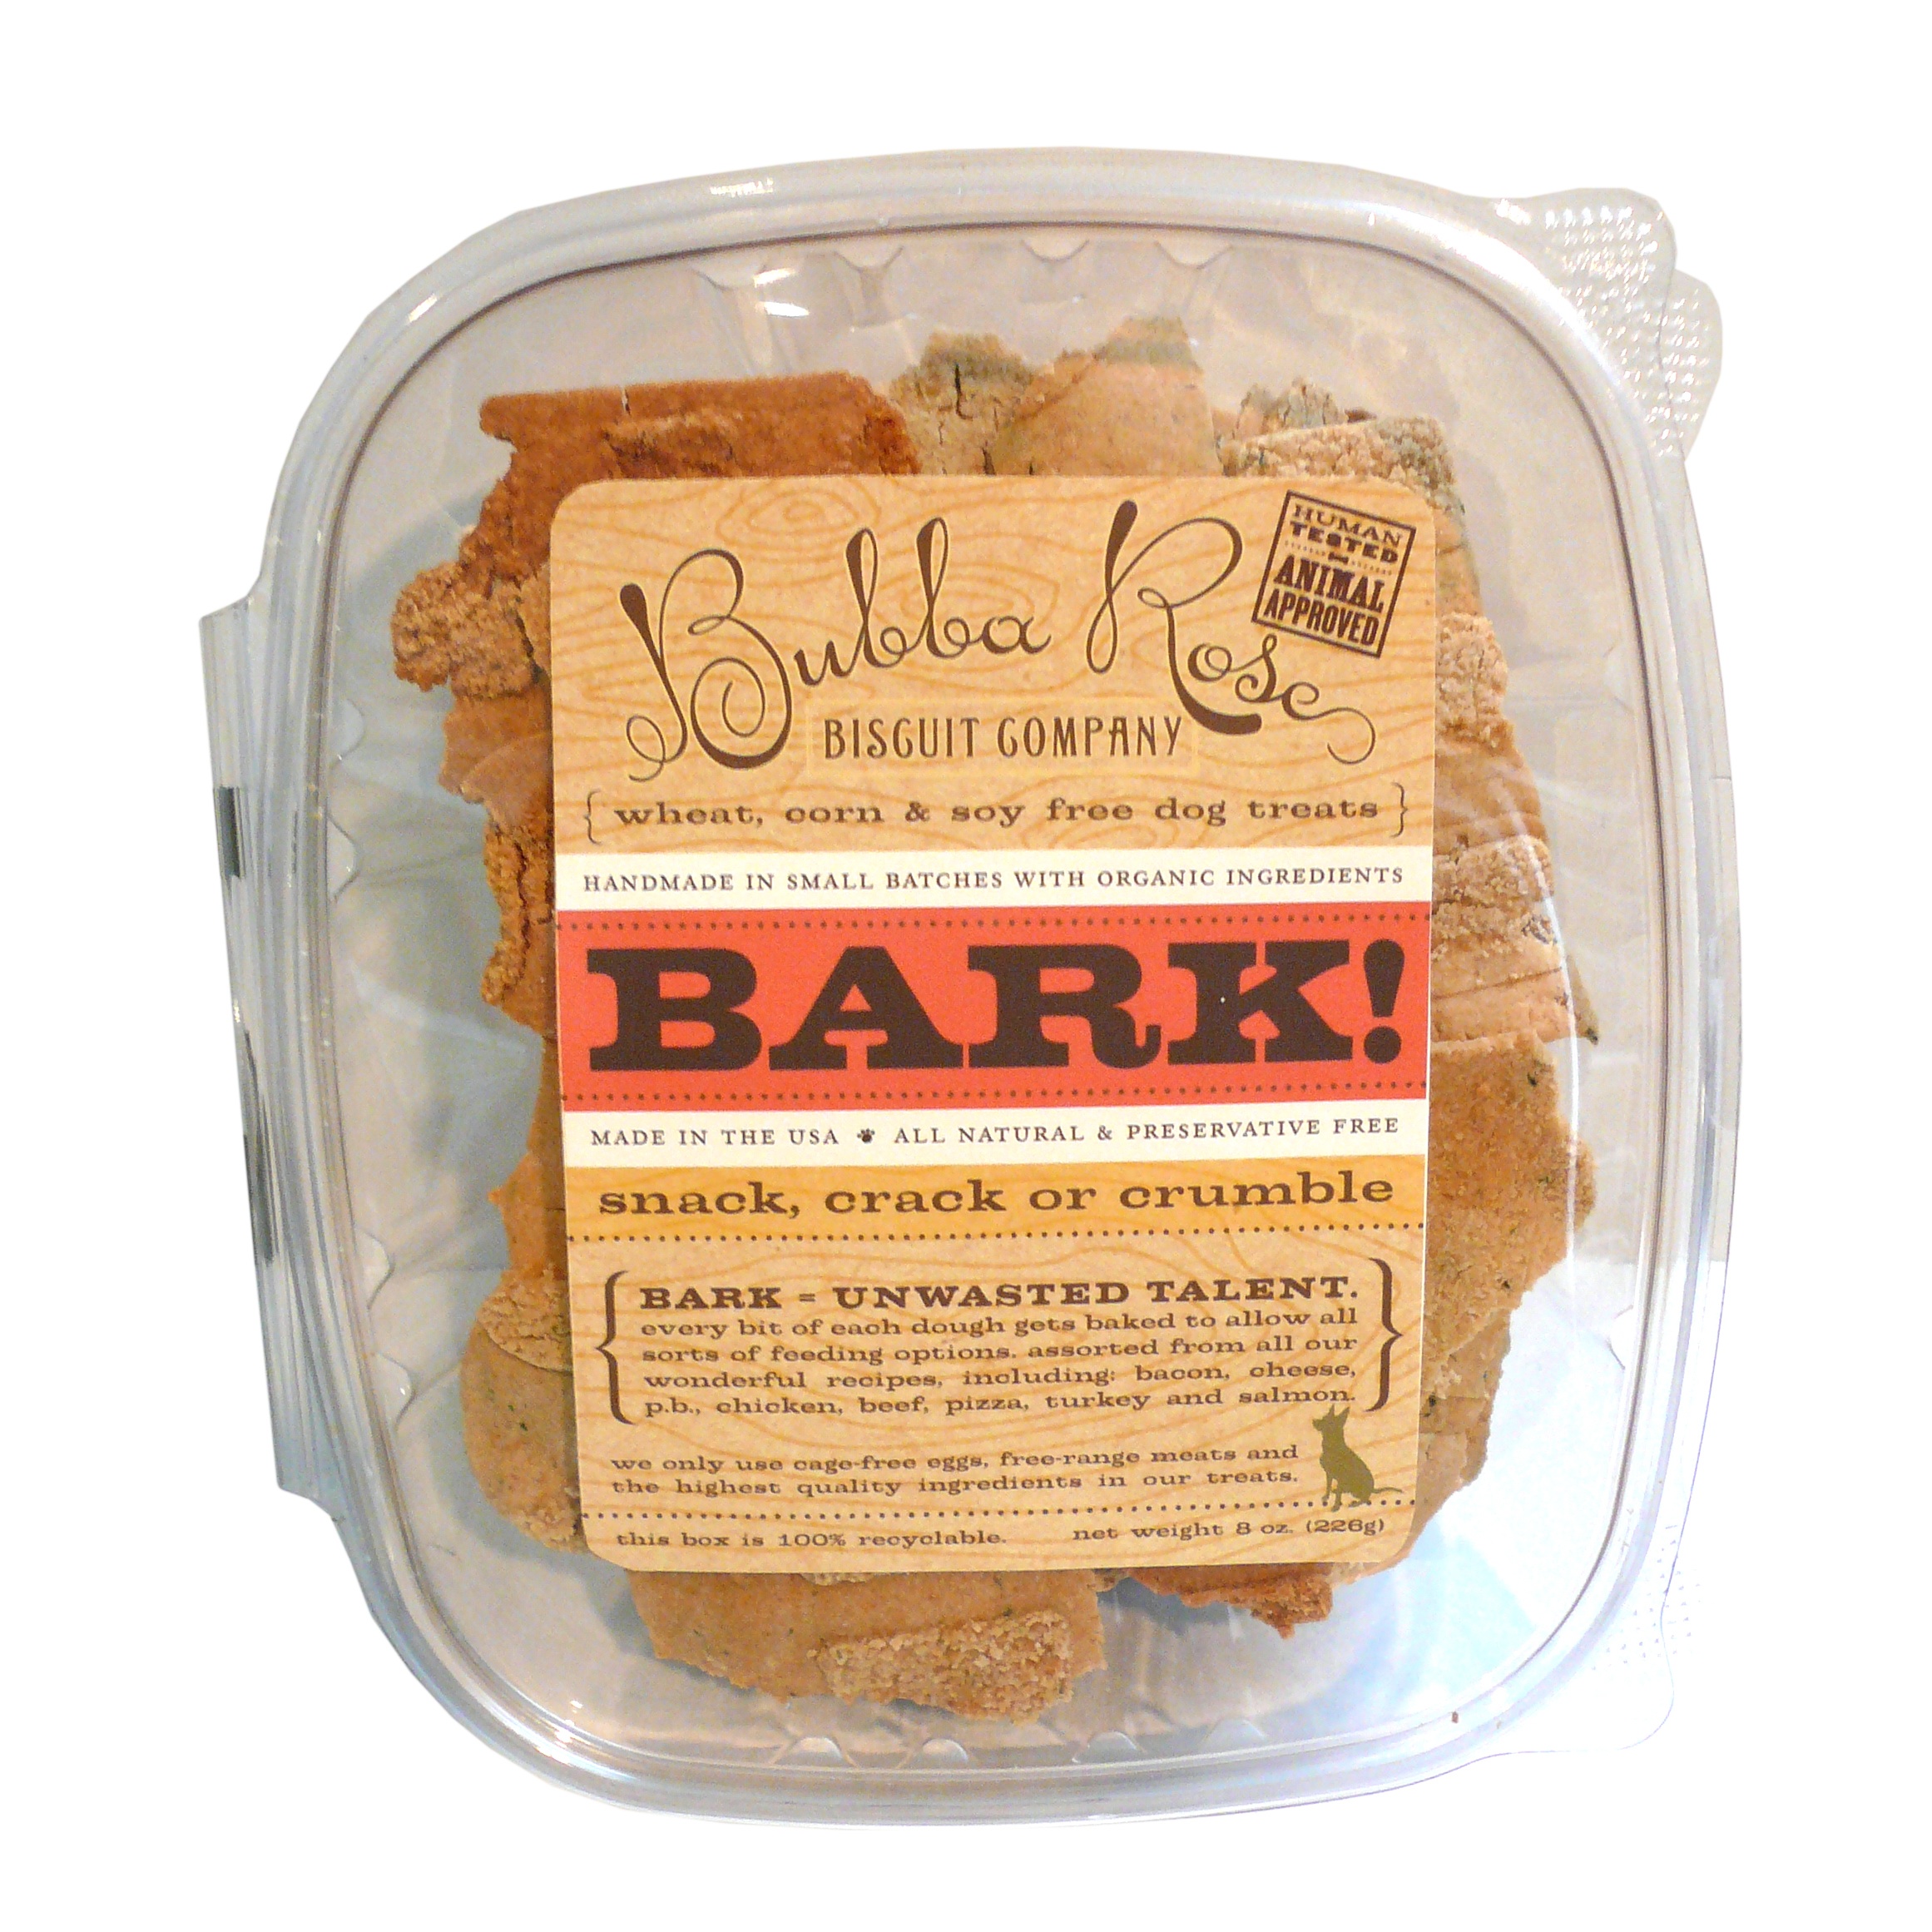 Custom product labels from Lightning Labels, like on these dog biscuits, can help pet brands stand out.